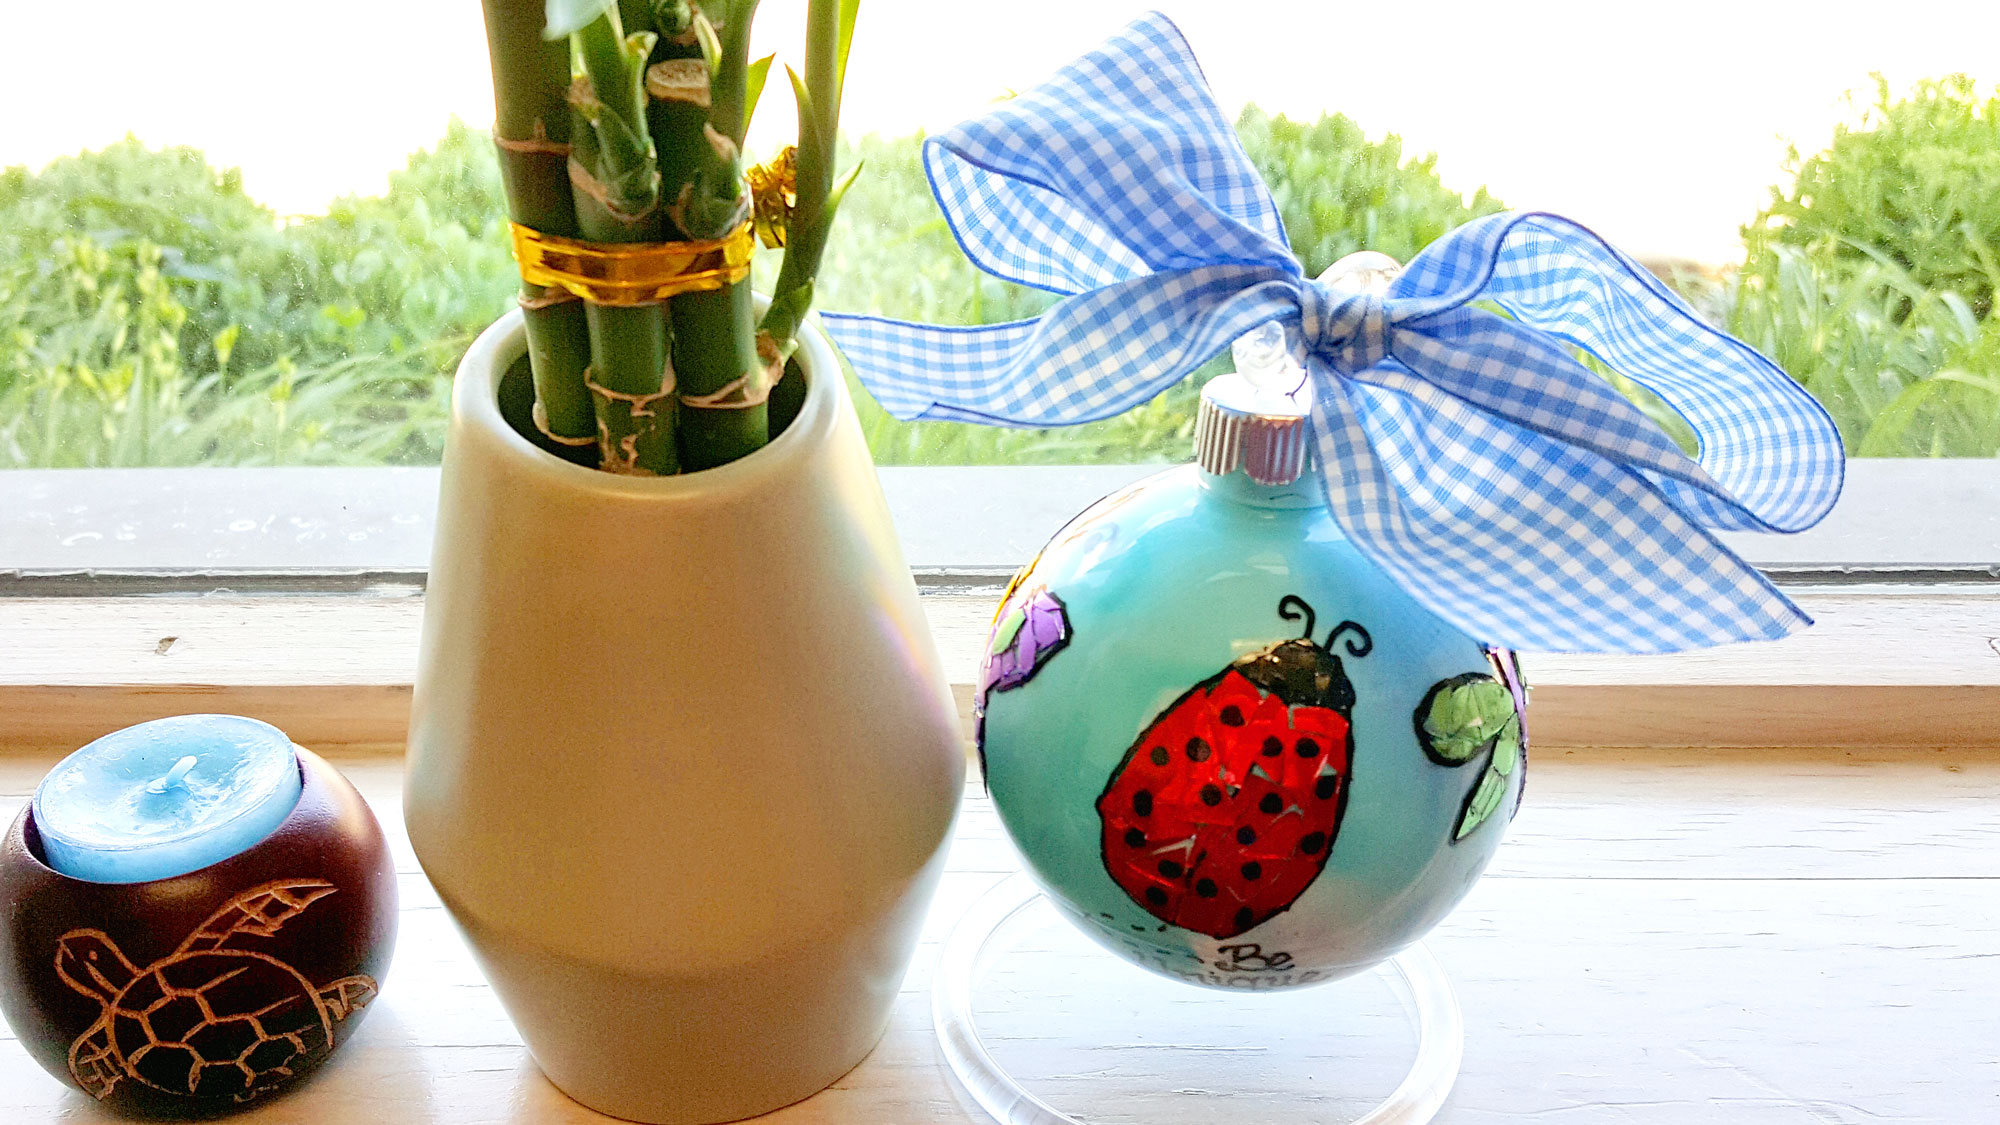 The final product sits on a window sill with a bright red ladybug facing the camera, next to a bamboo plant | OrnamentShop.com